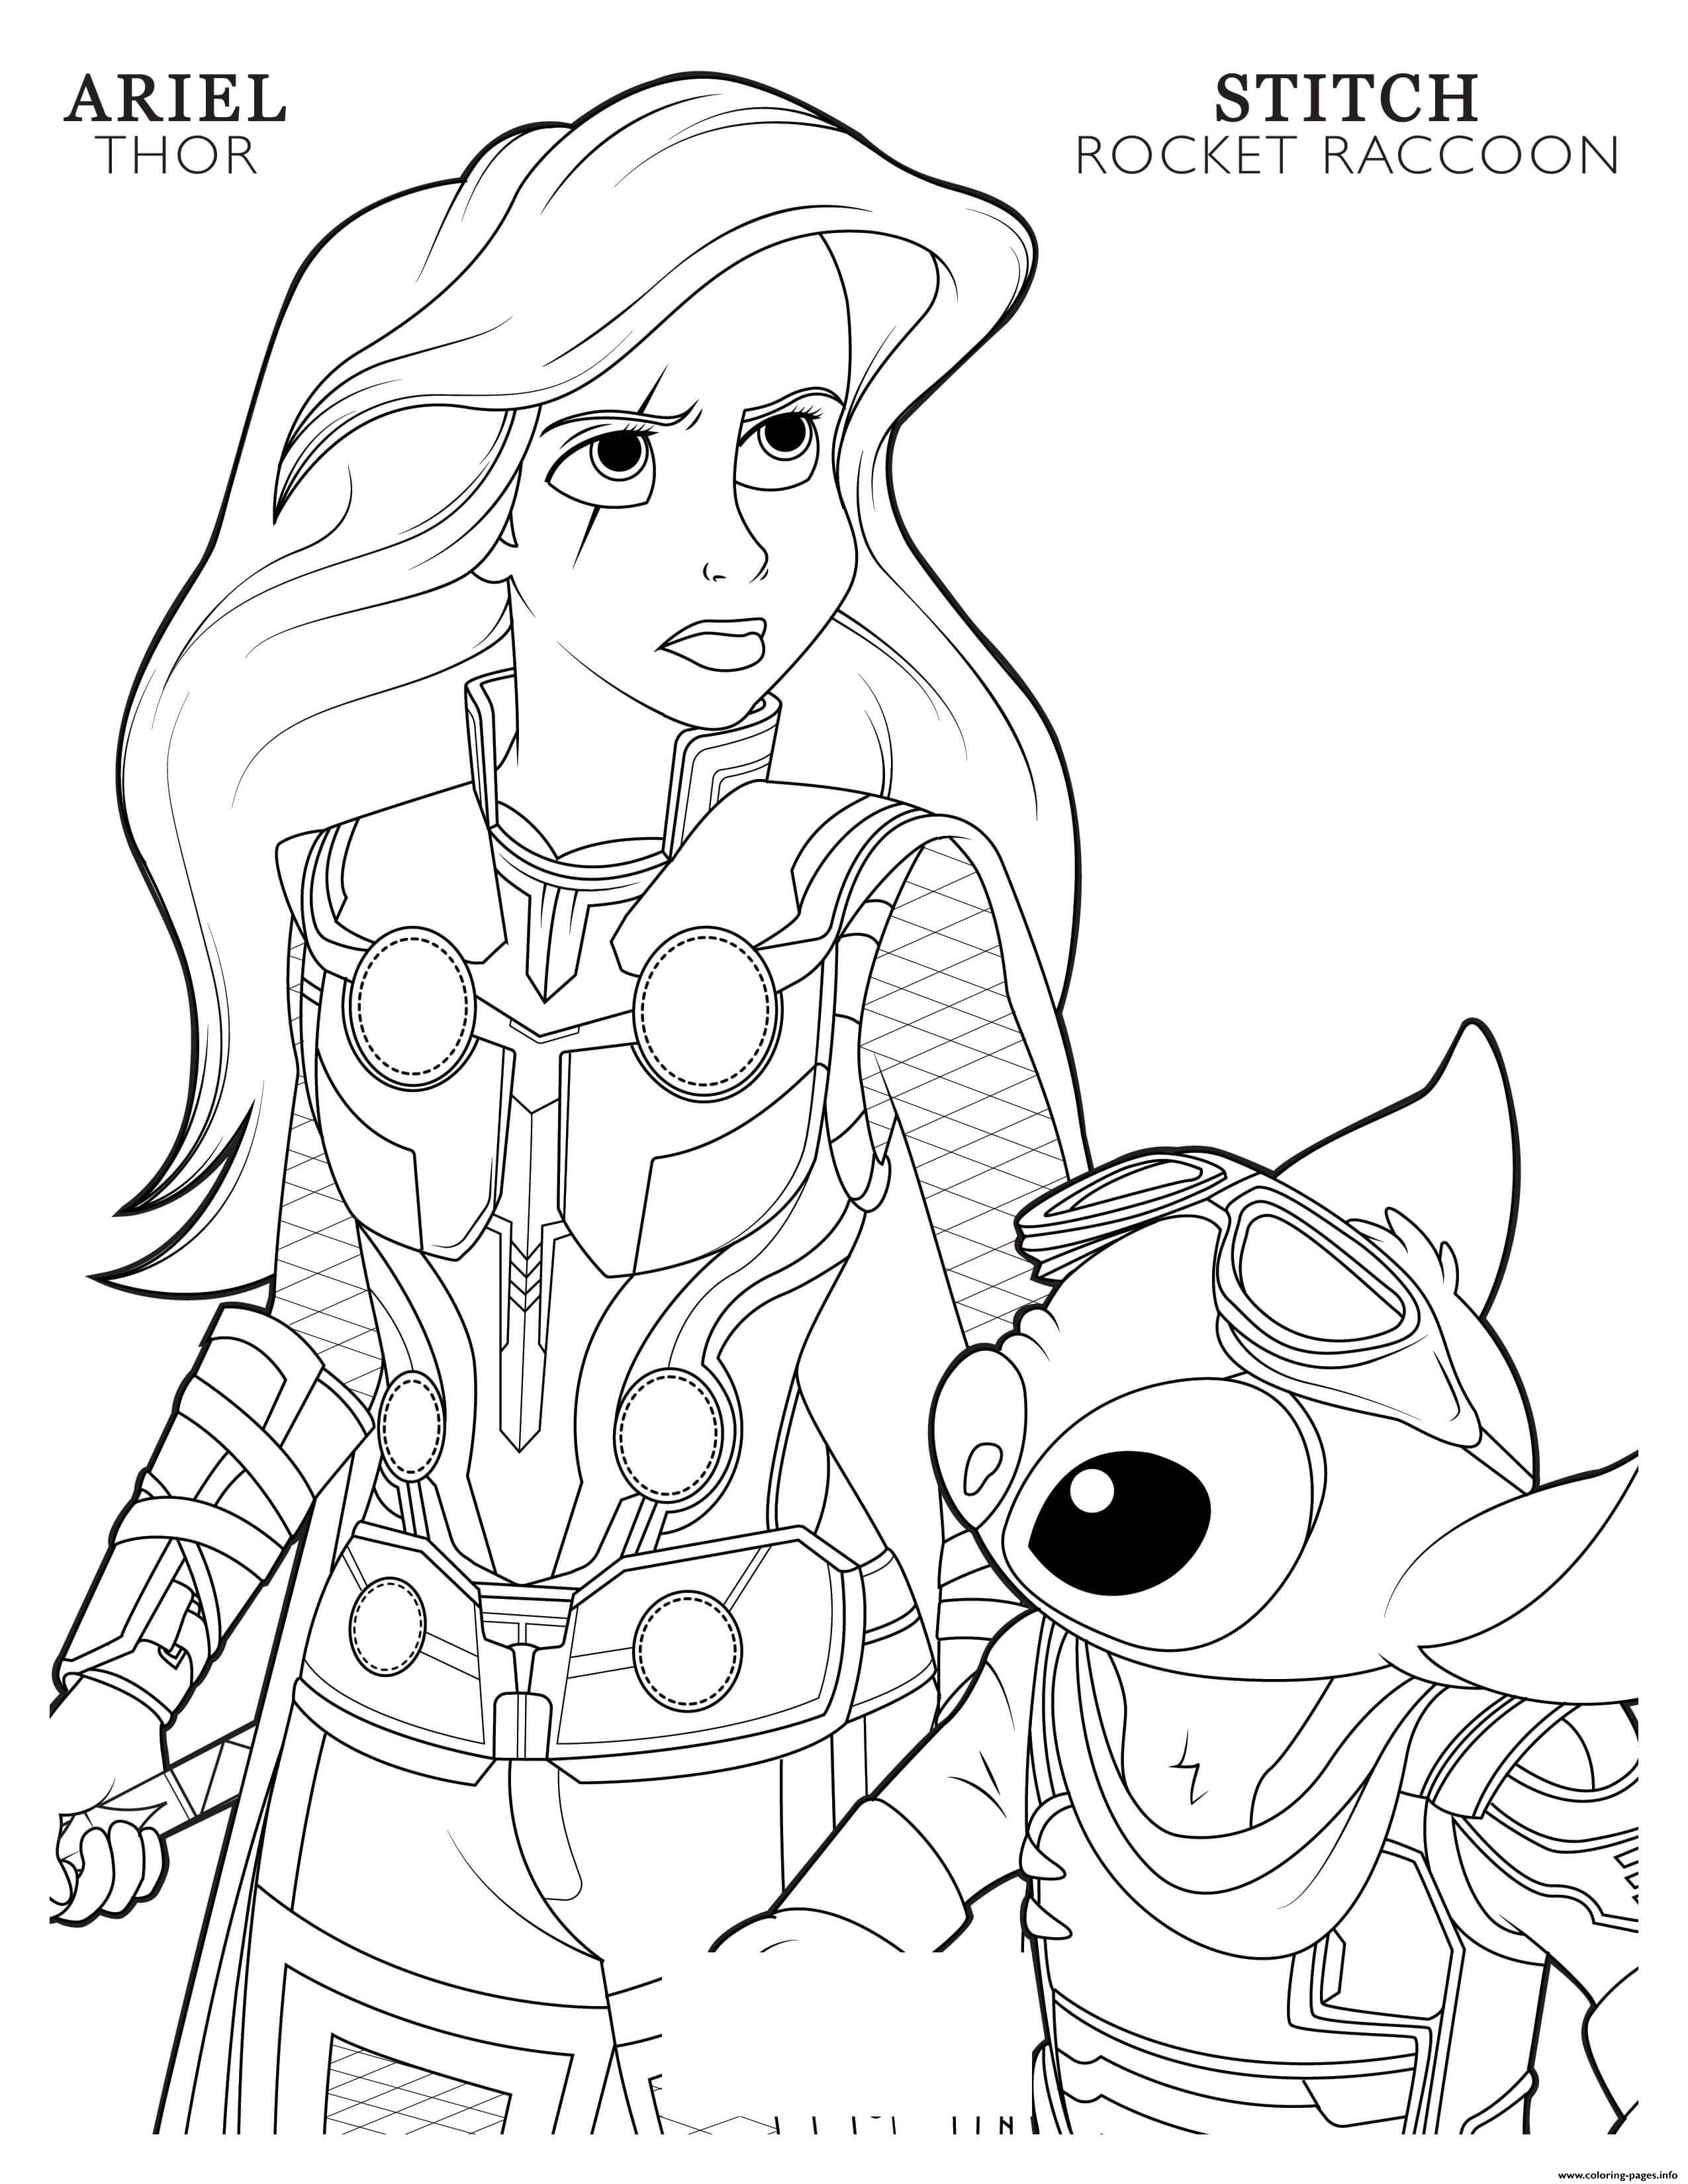 Thor Ariel And Rocket Raccoon Stitch Disney Avengers Coloring page ...